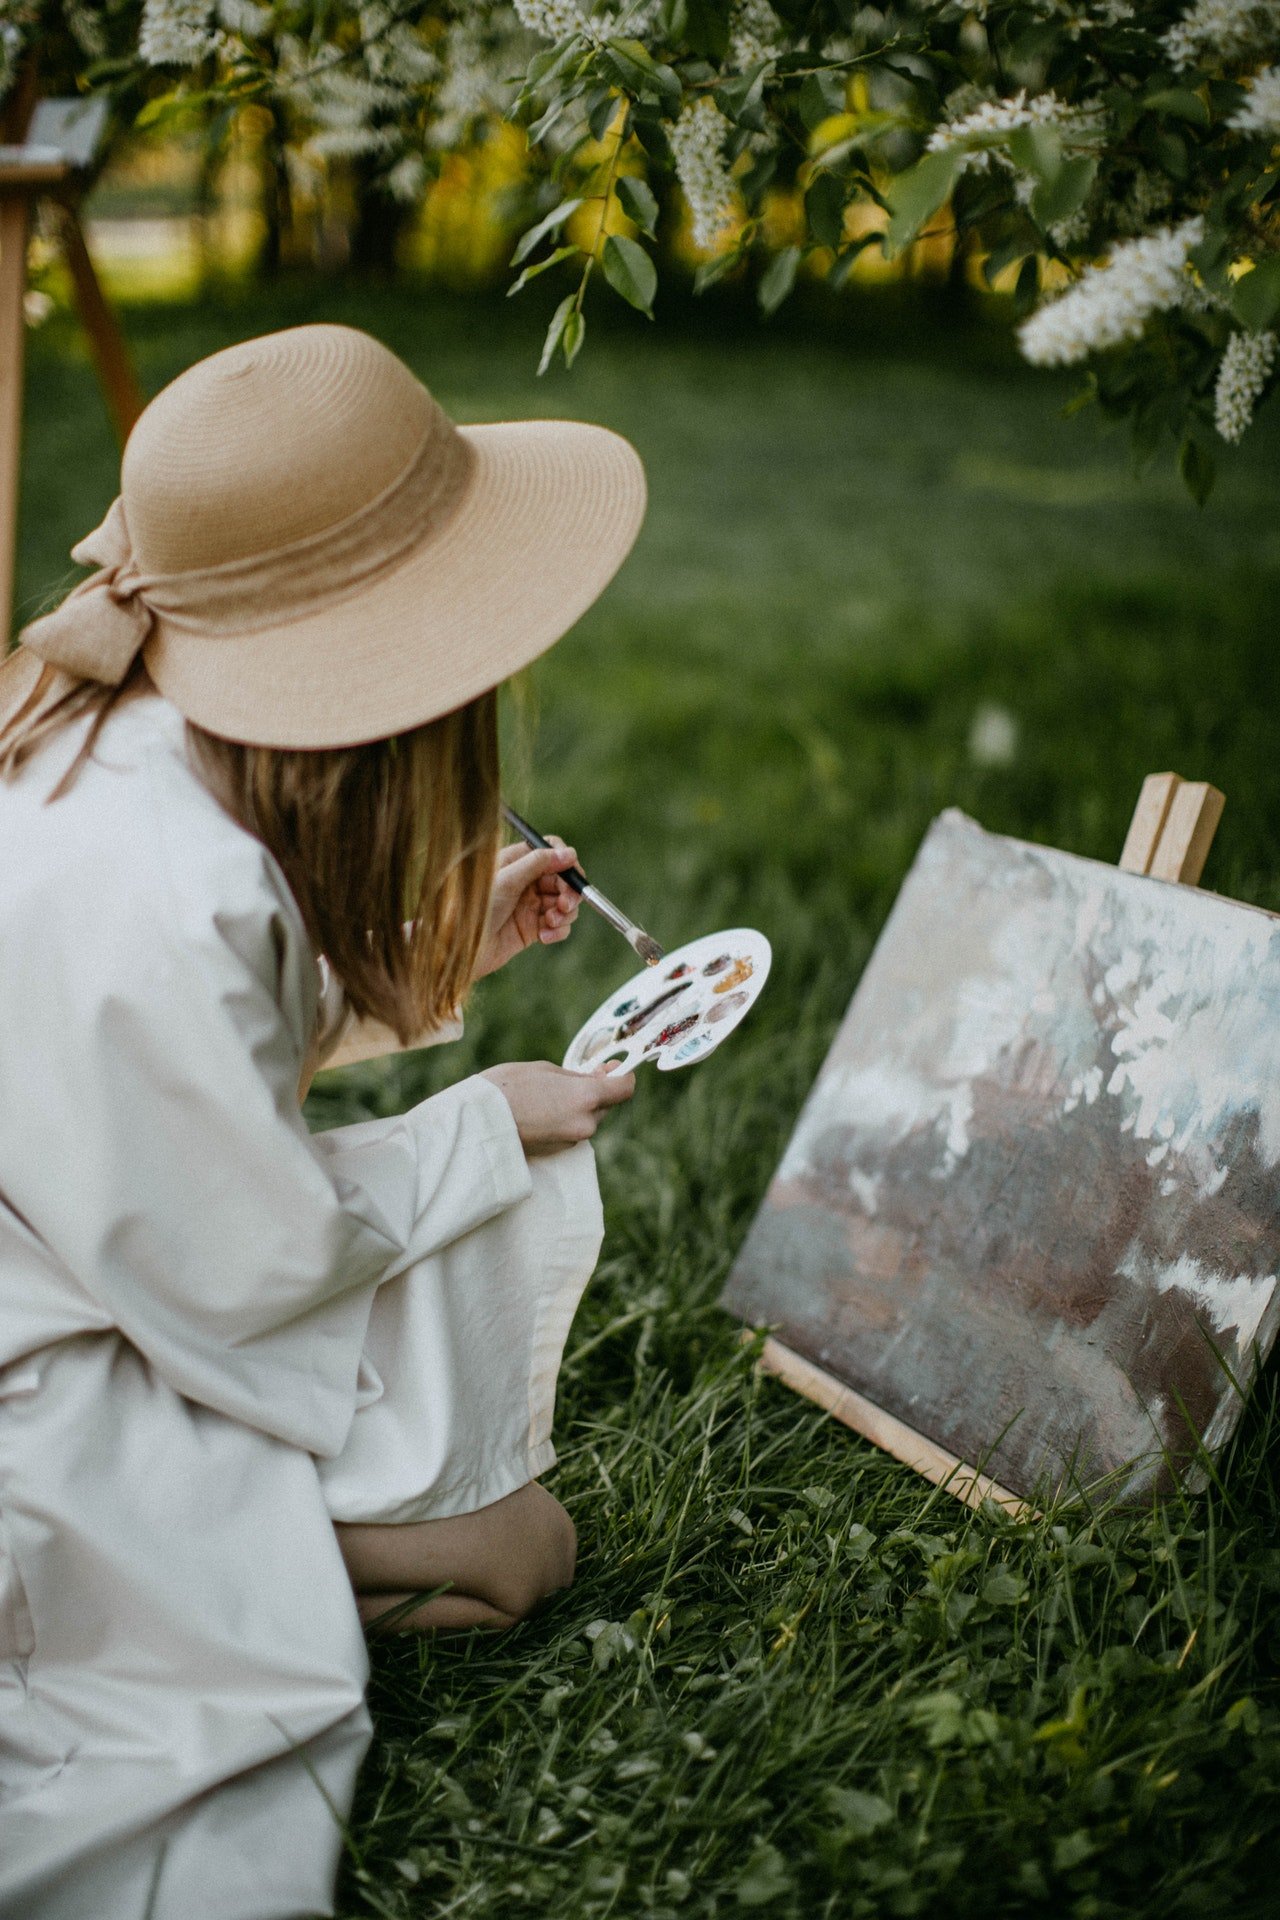 Photo of an artist painting | Photo: Pexels